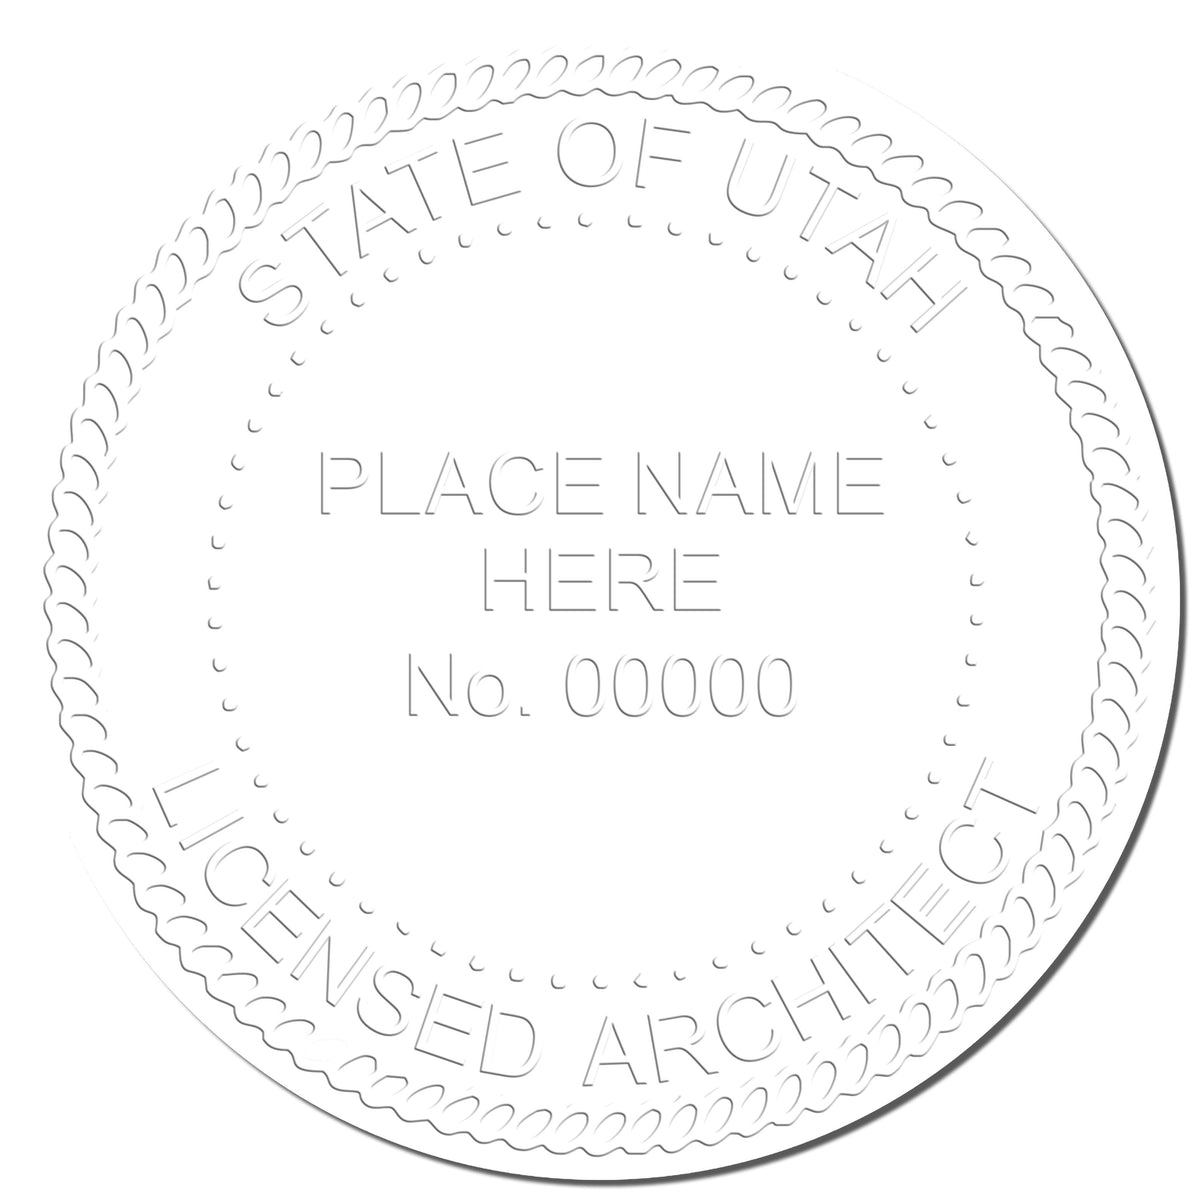 This paper is stamped with a sample imprint of the State of Utah Architectural Seal Embosser, signifying its quality and reliability.